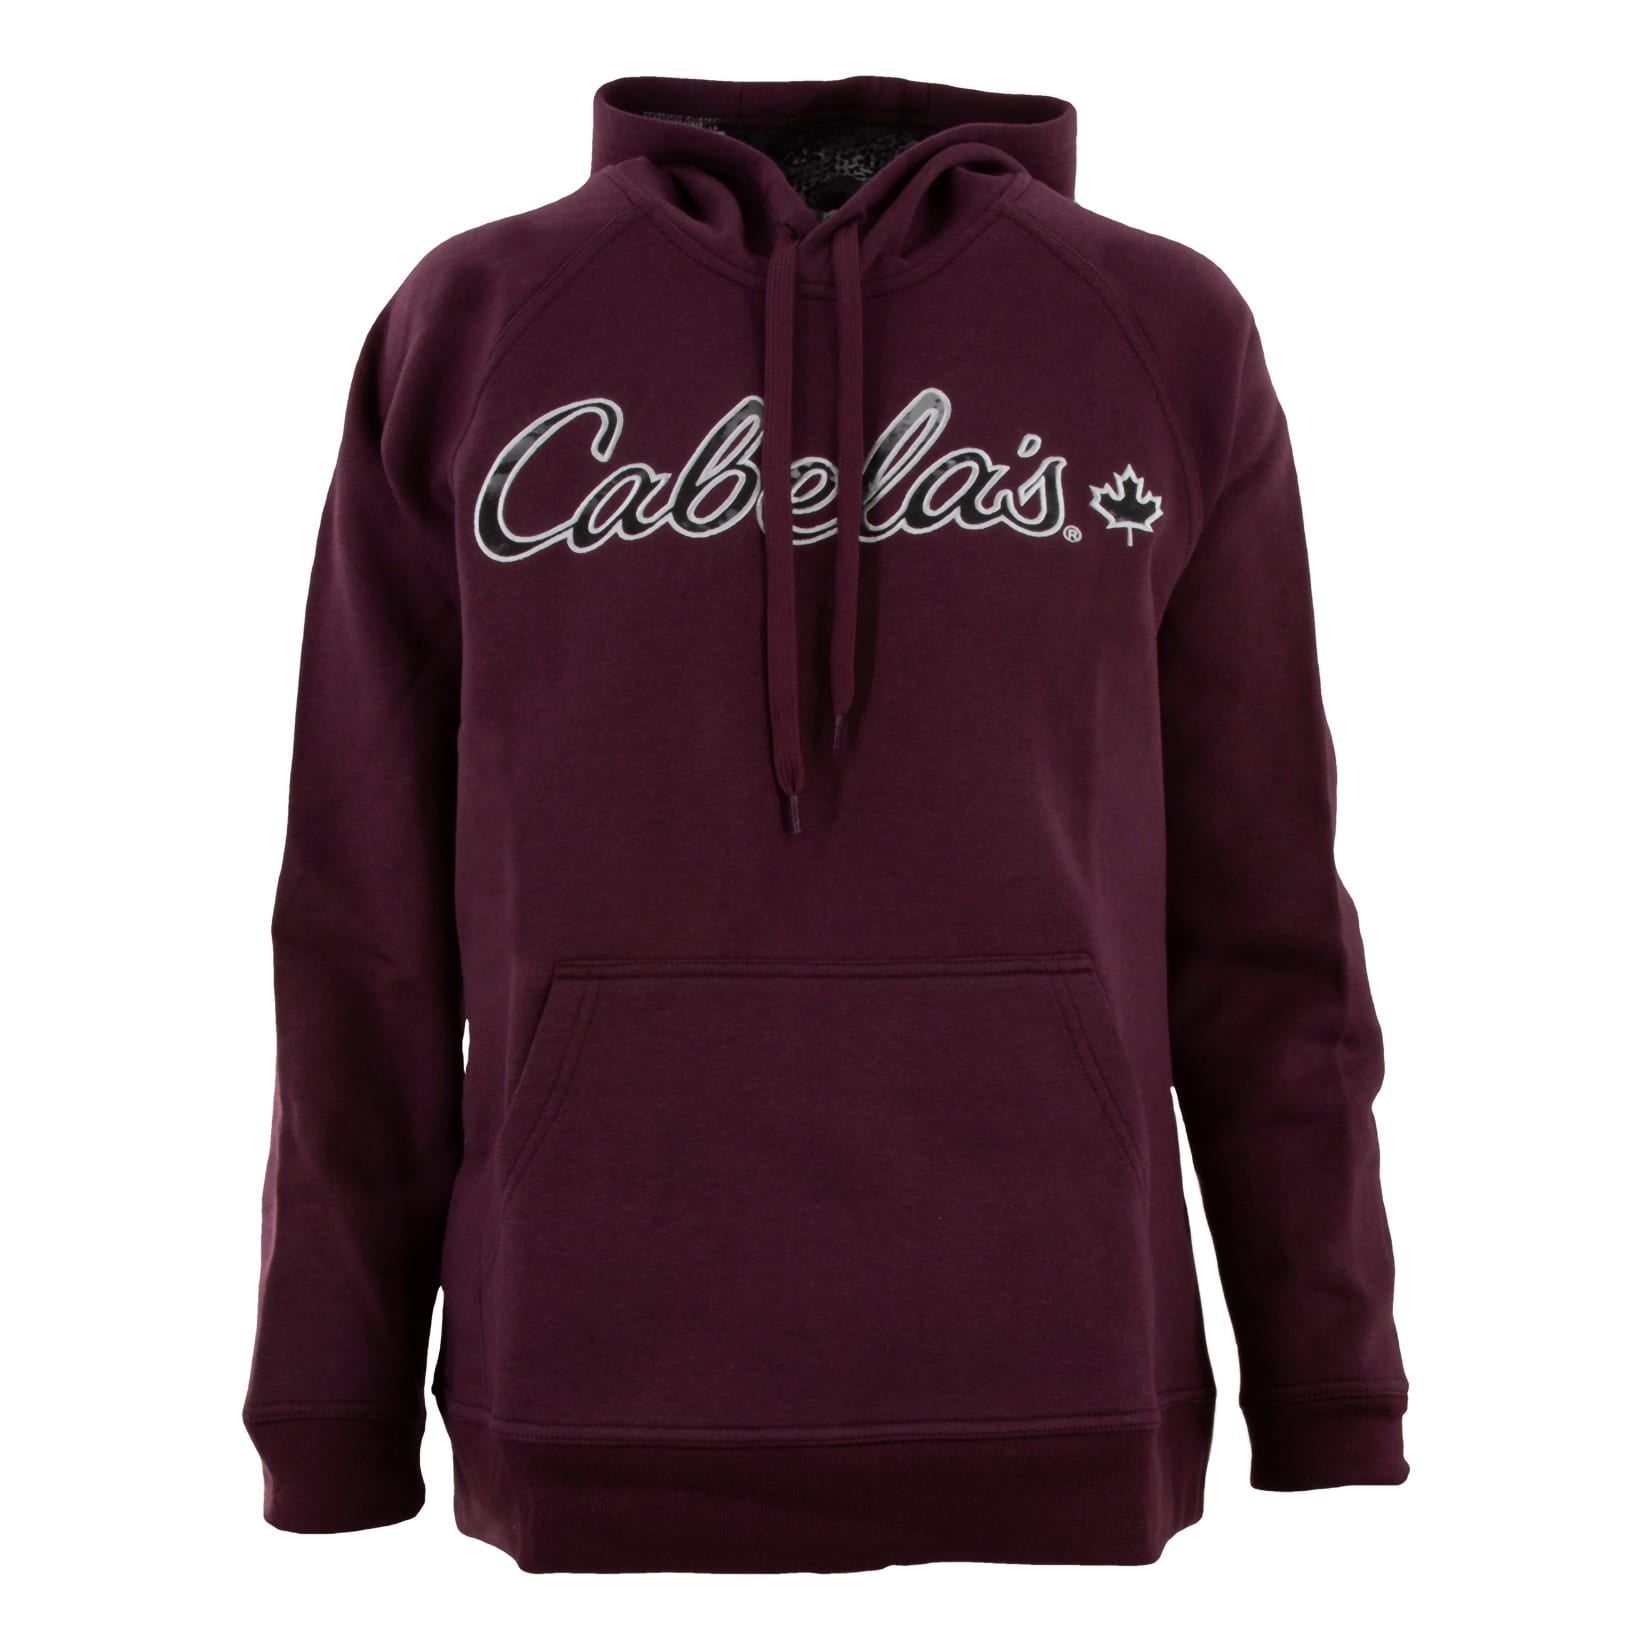 Cabela’s Canada Women’s Game Day Long-Sleeve Hoodie - Mauve Wine